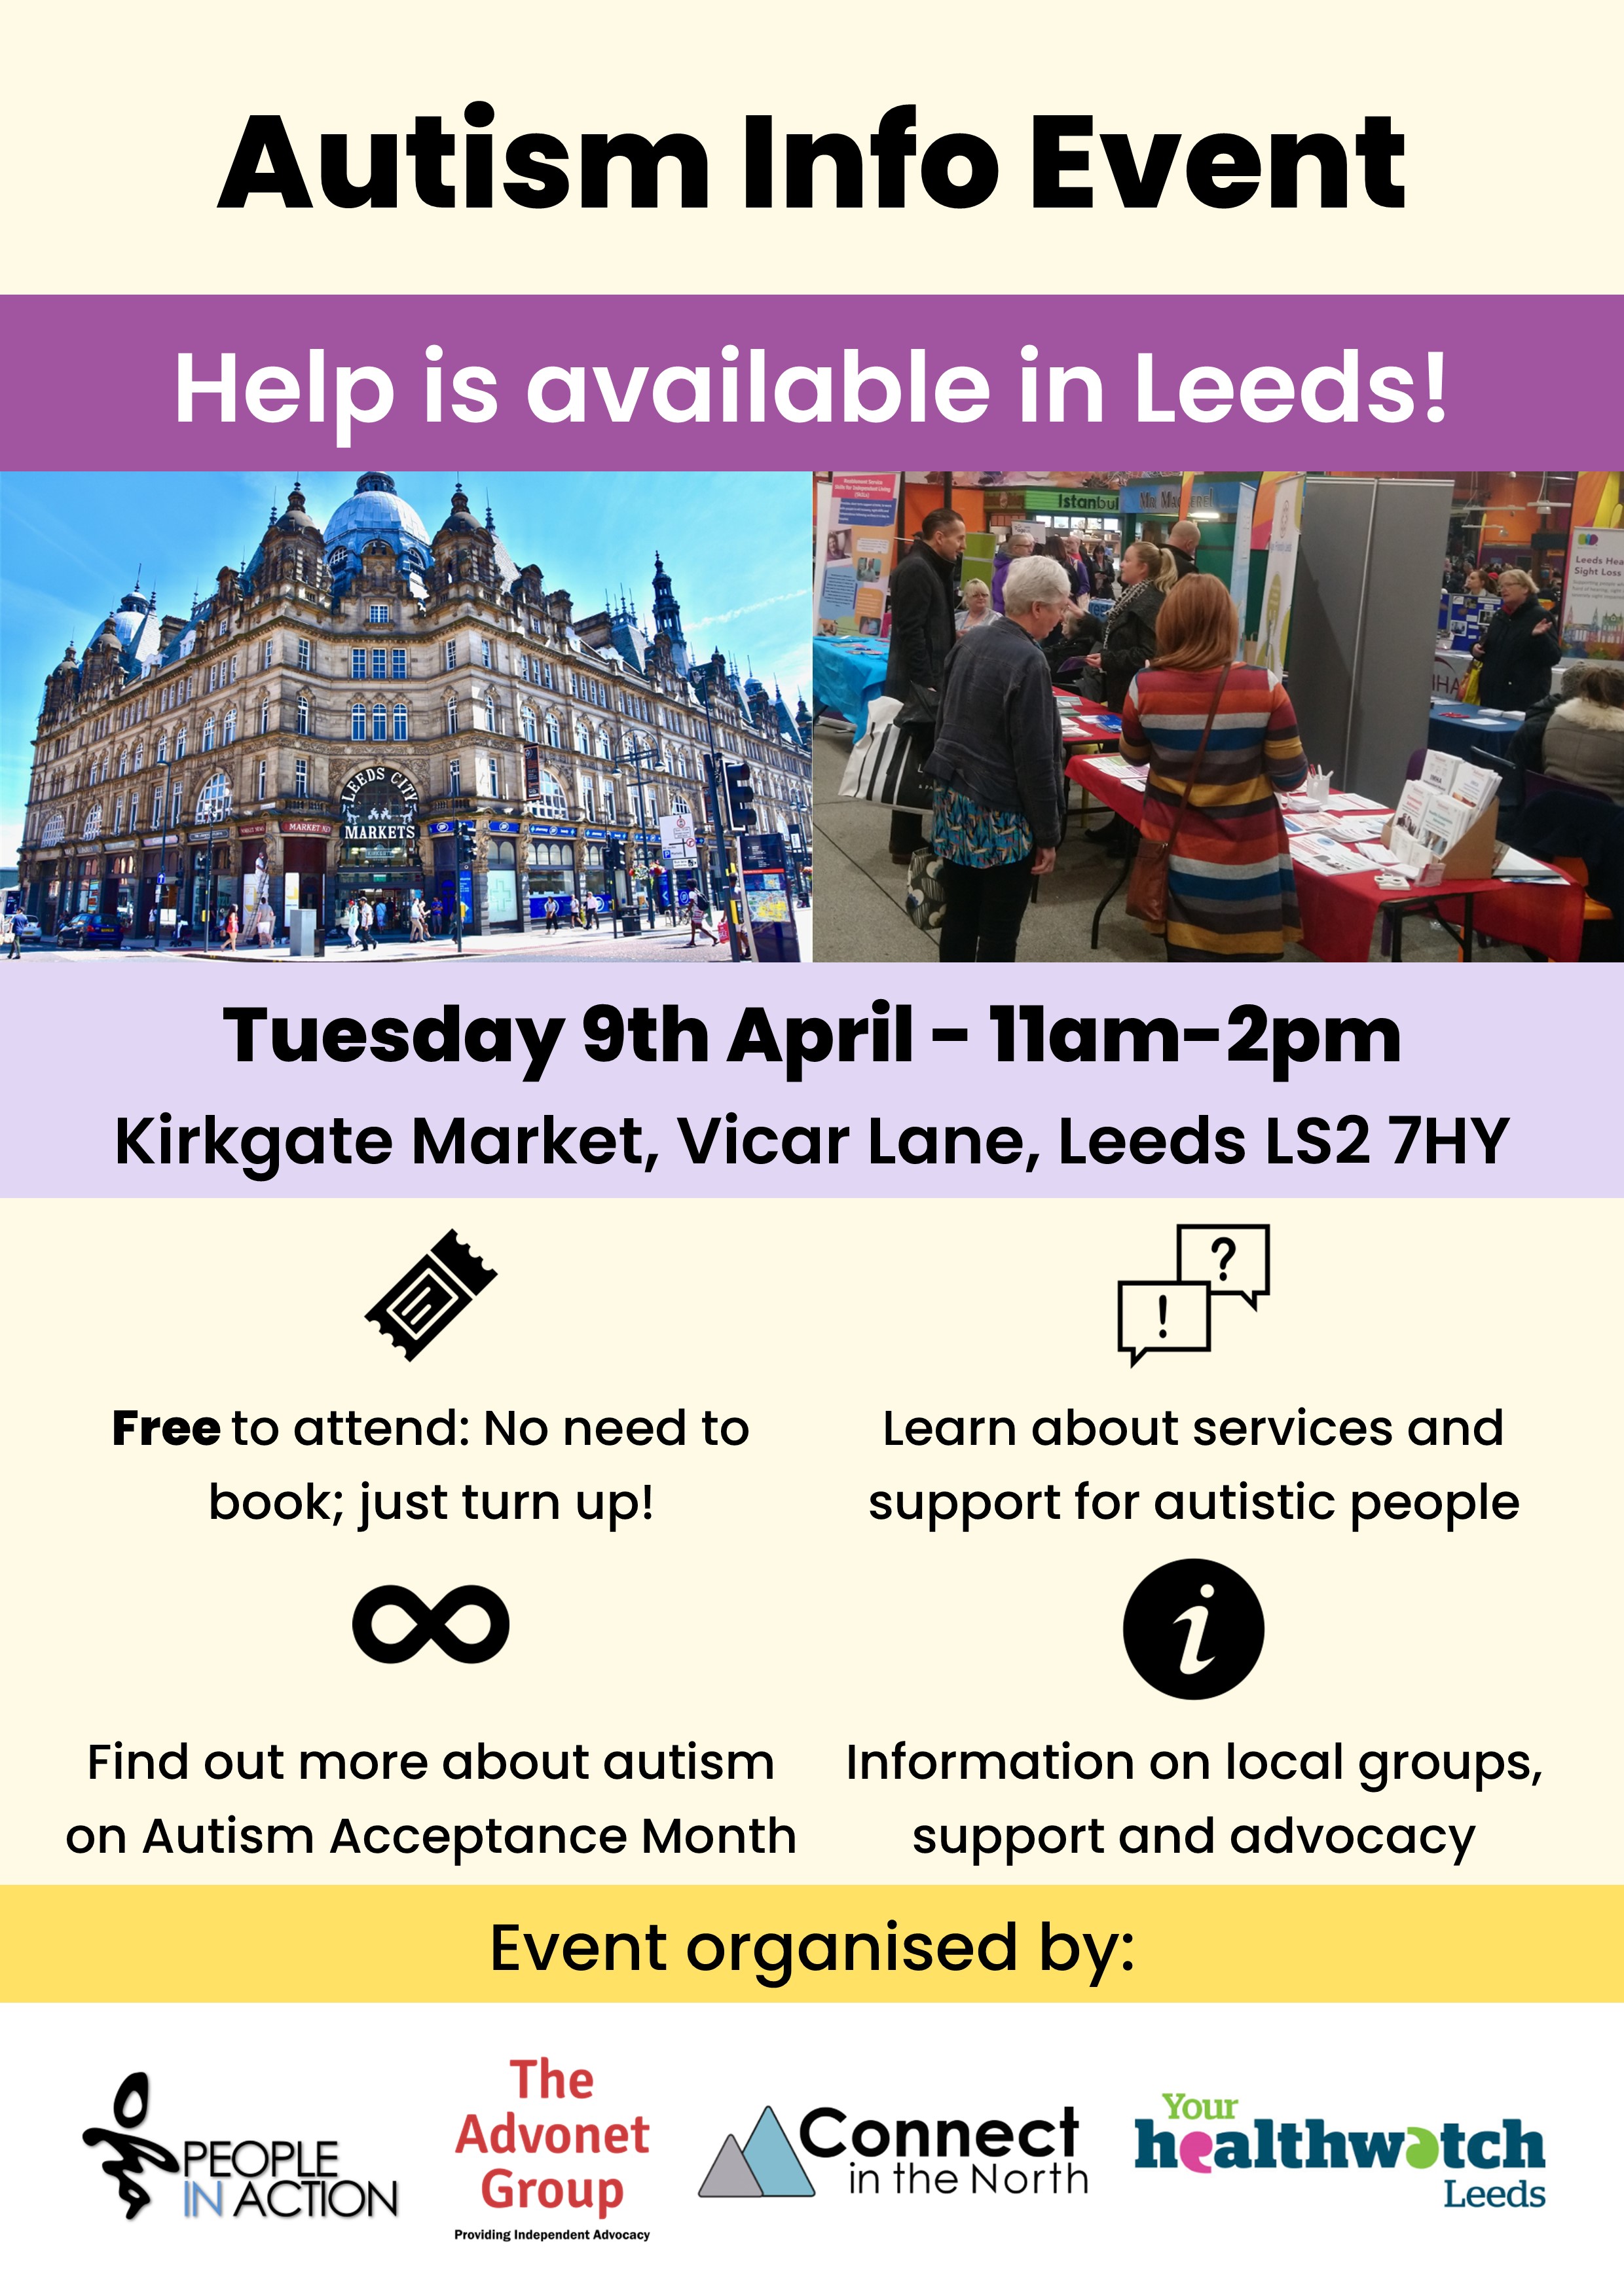 Poster for the autism info event at Leeds Kirkgate Market. All the information in the poster is included in the post. There is an image of people stood at stalls and an image of the front of Leeds Kirkgate Market.